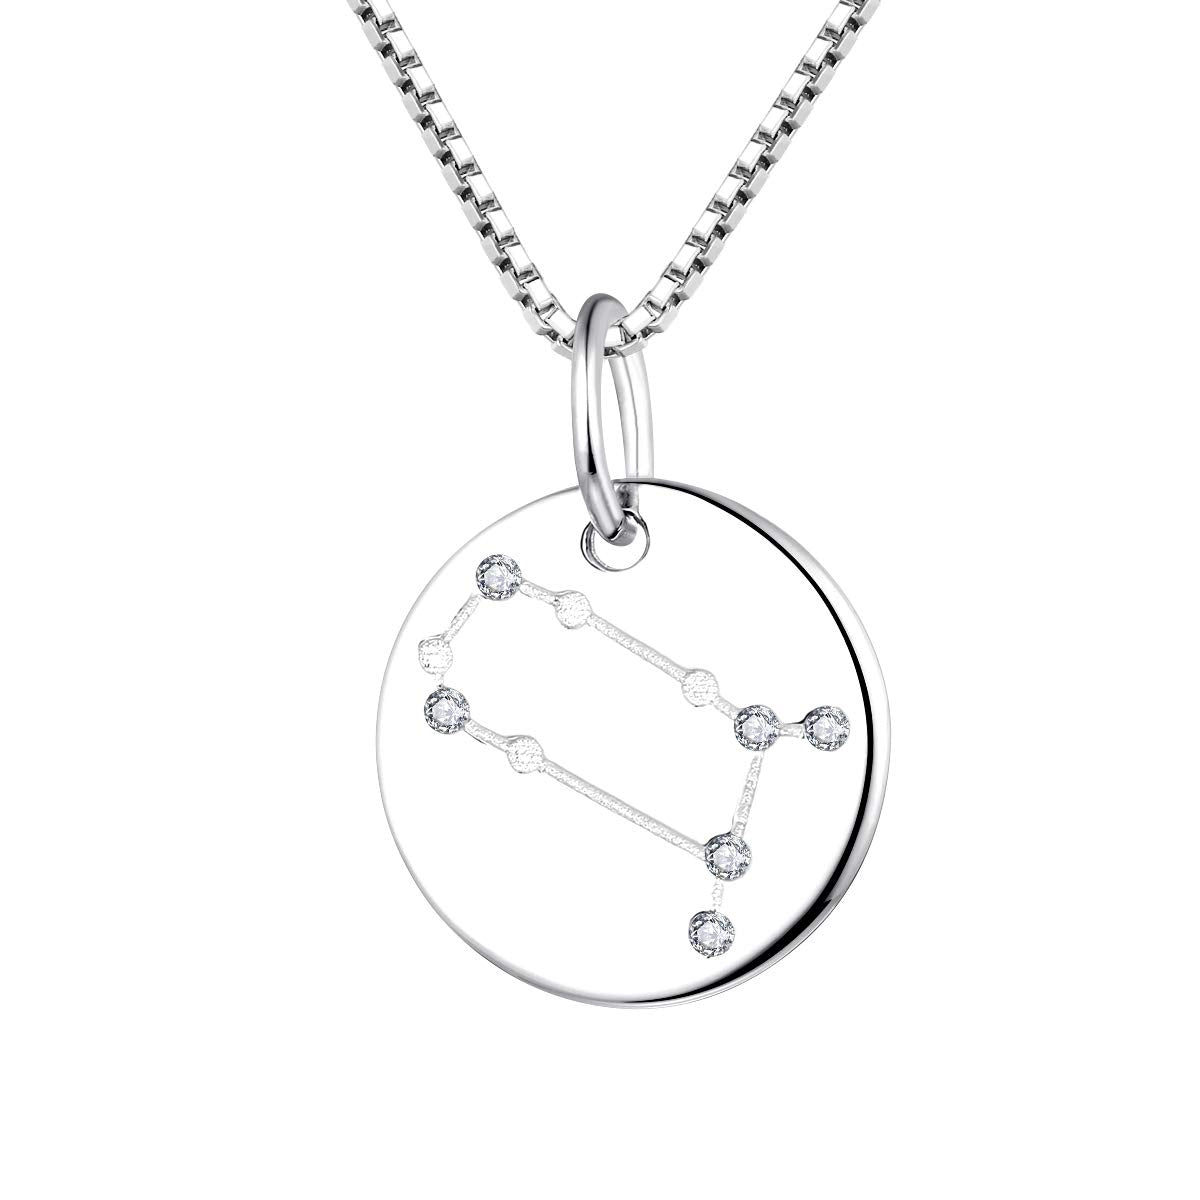 Women's Constellation Jewelry Sterling Silver Zodiac Necklace Astrology Coin Disc Horoscope Pendant